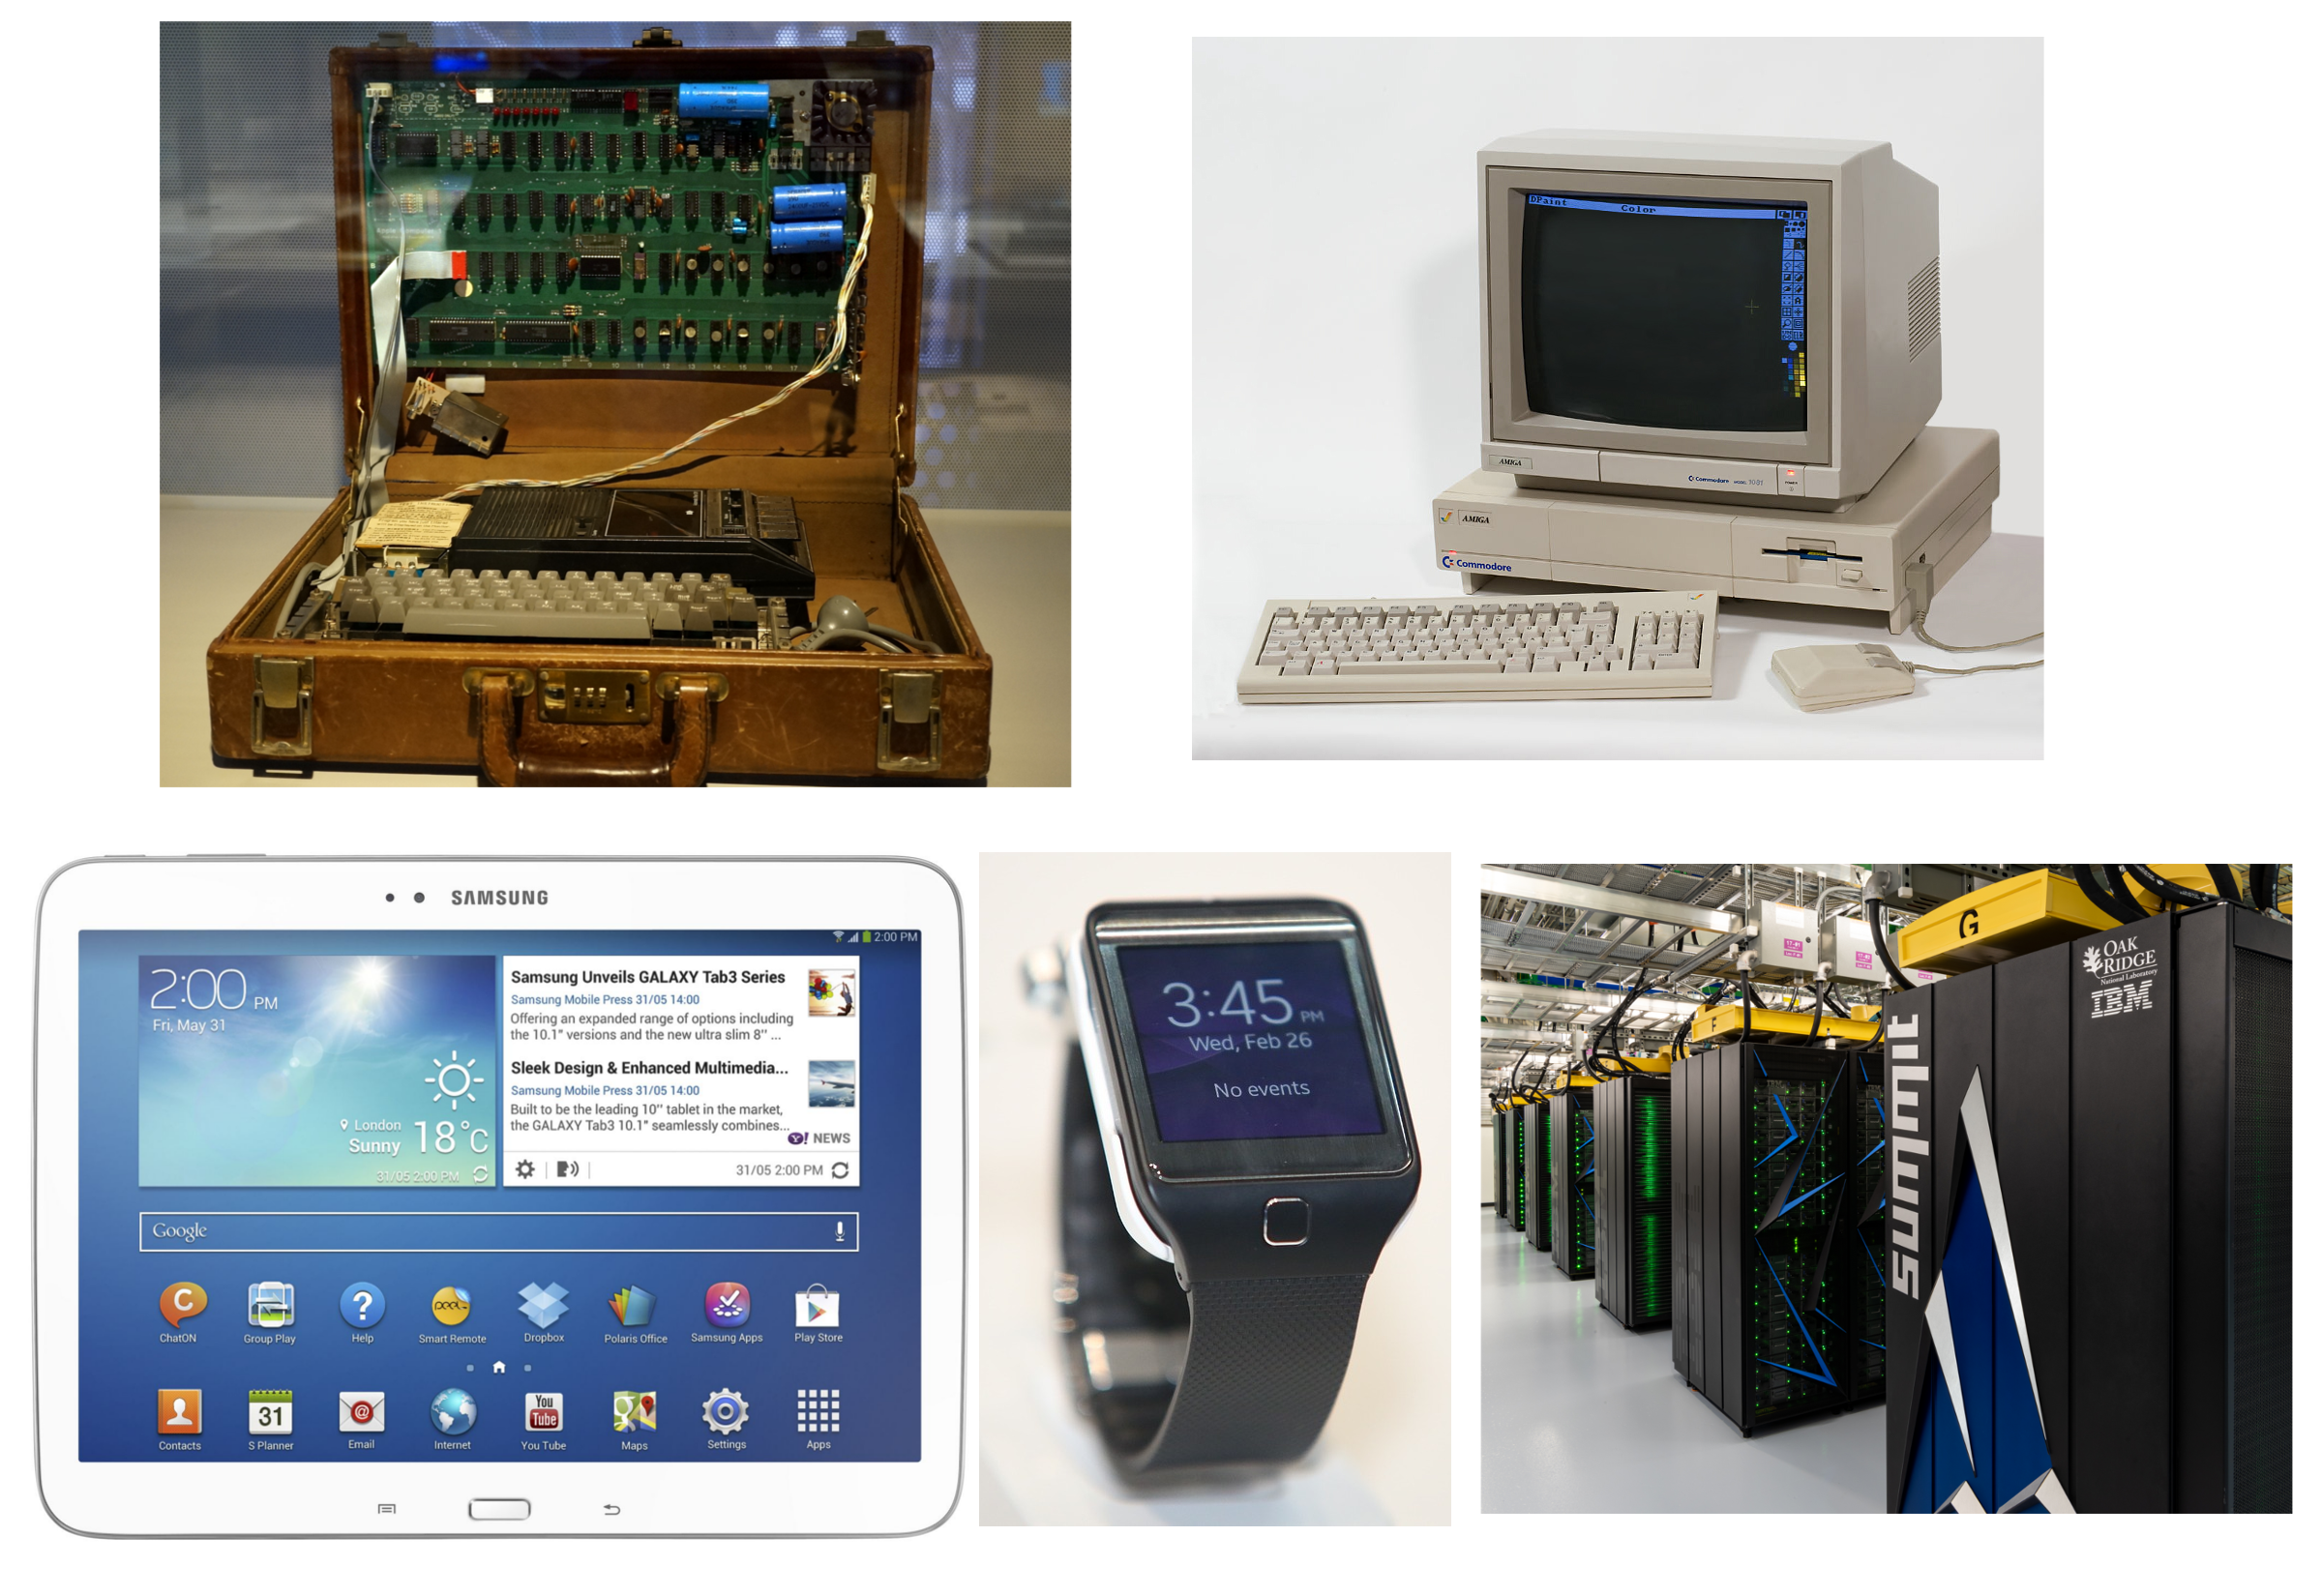 Computers from different generations and types (source: <https://commons.wikimedia.org>)